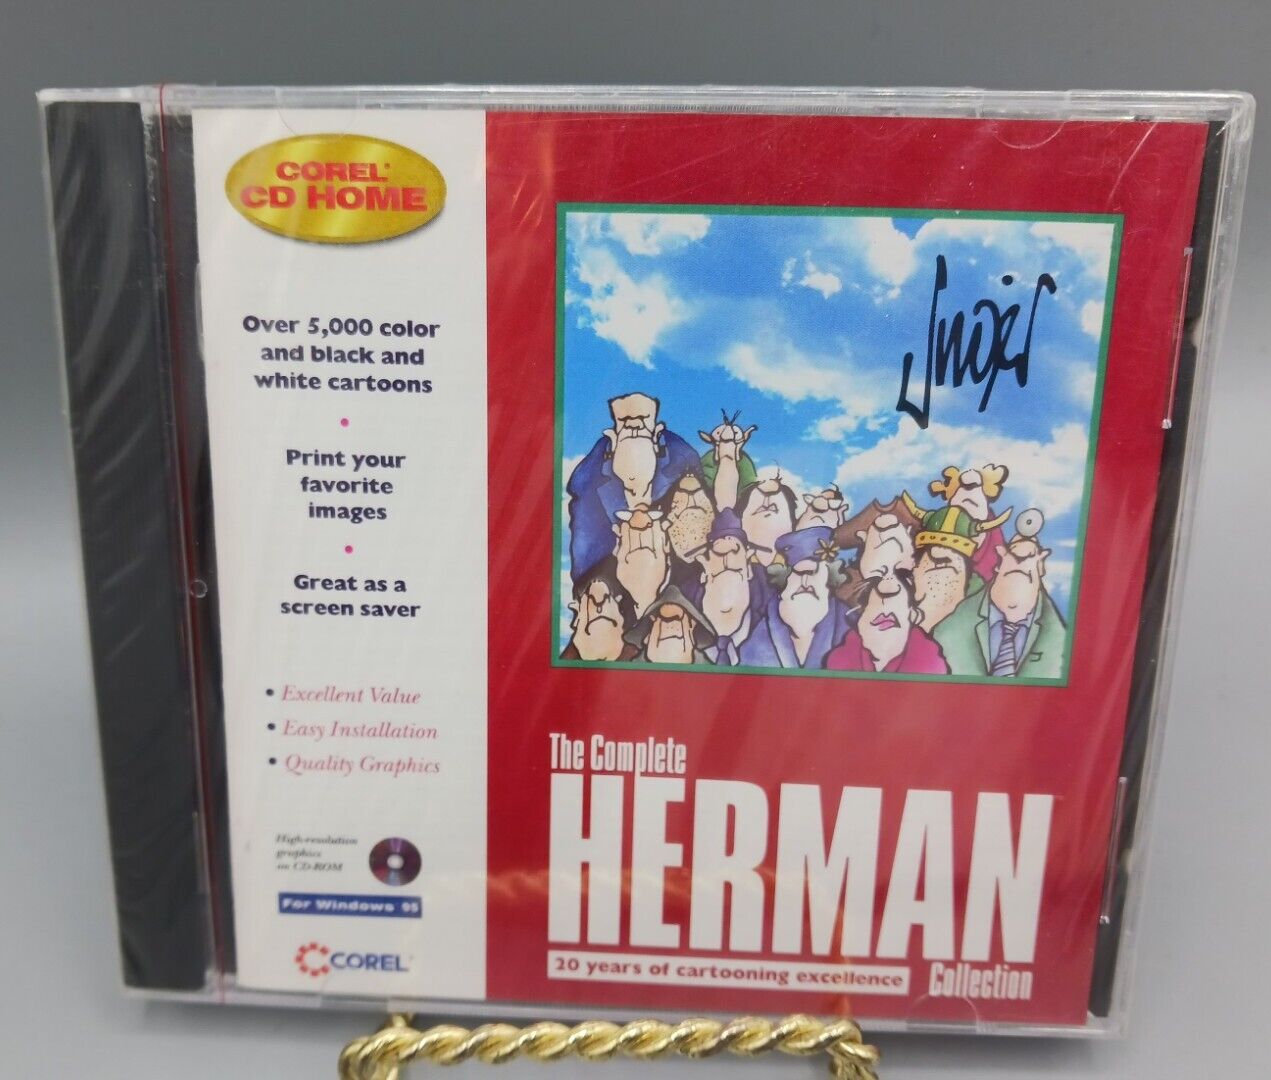 New Rare Sealed The Complete Herman Collection (PC CD ROM)